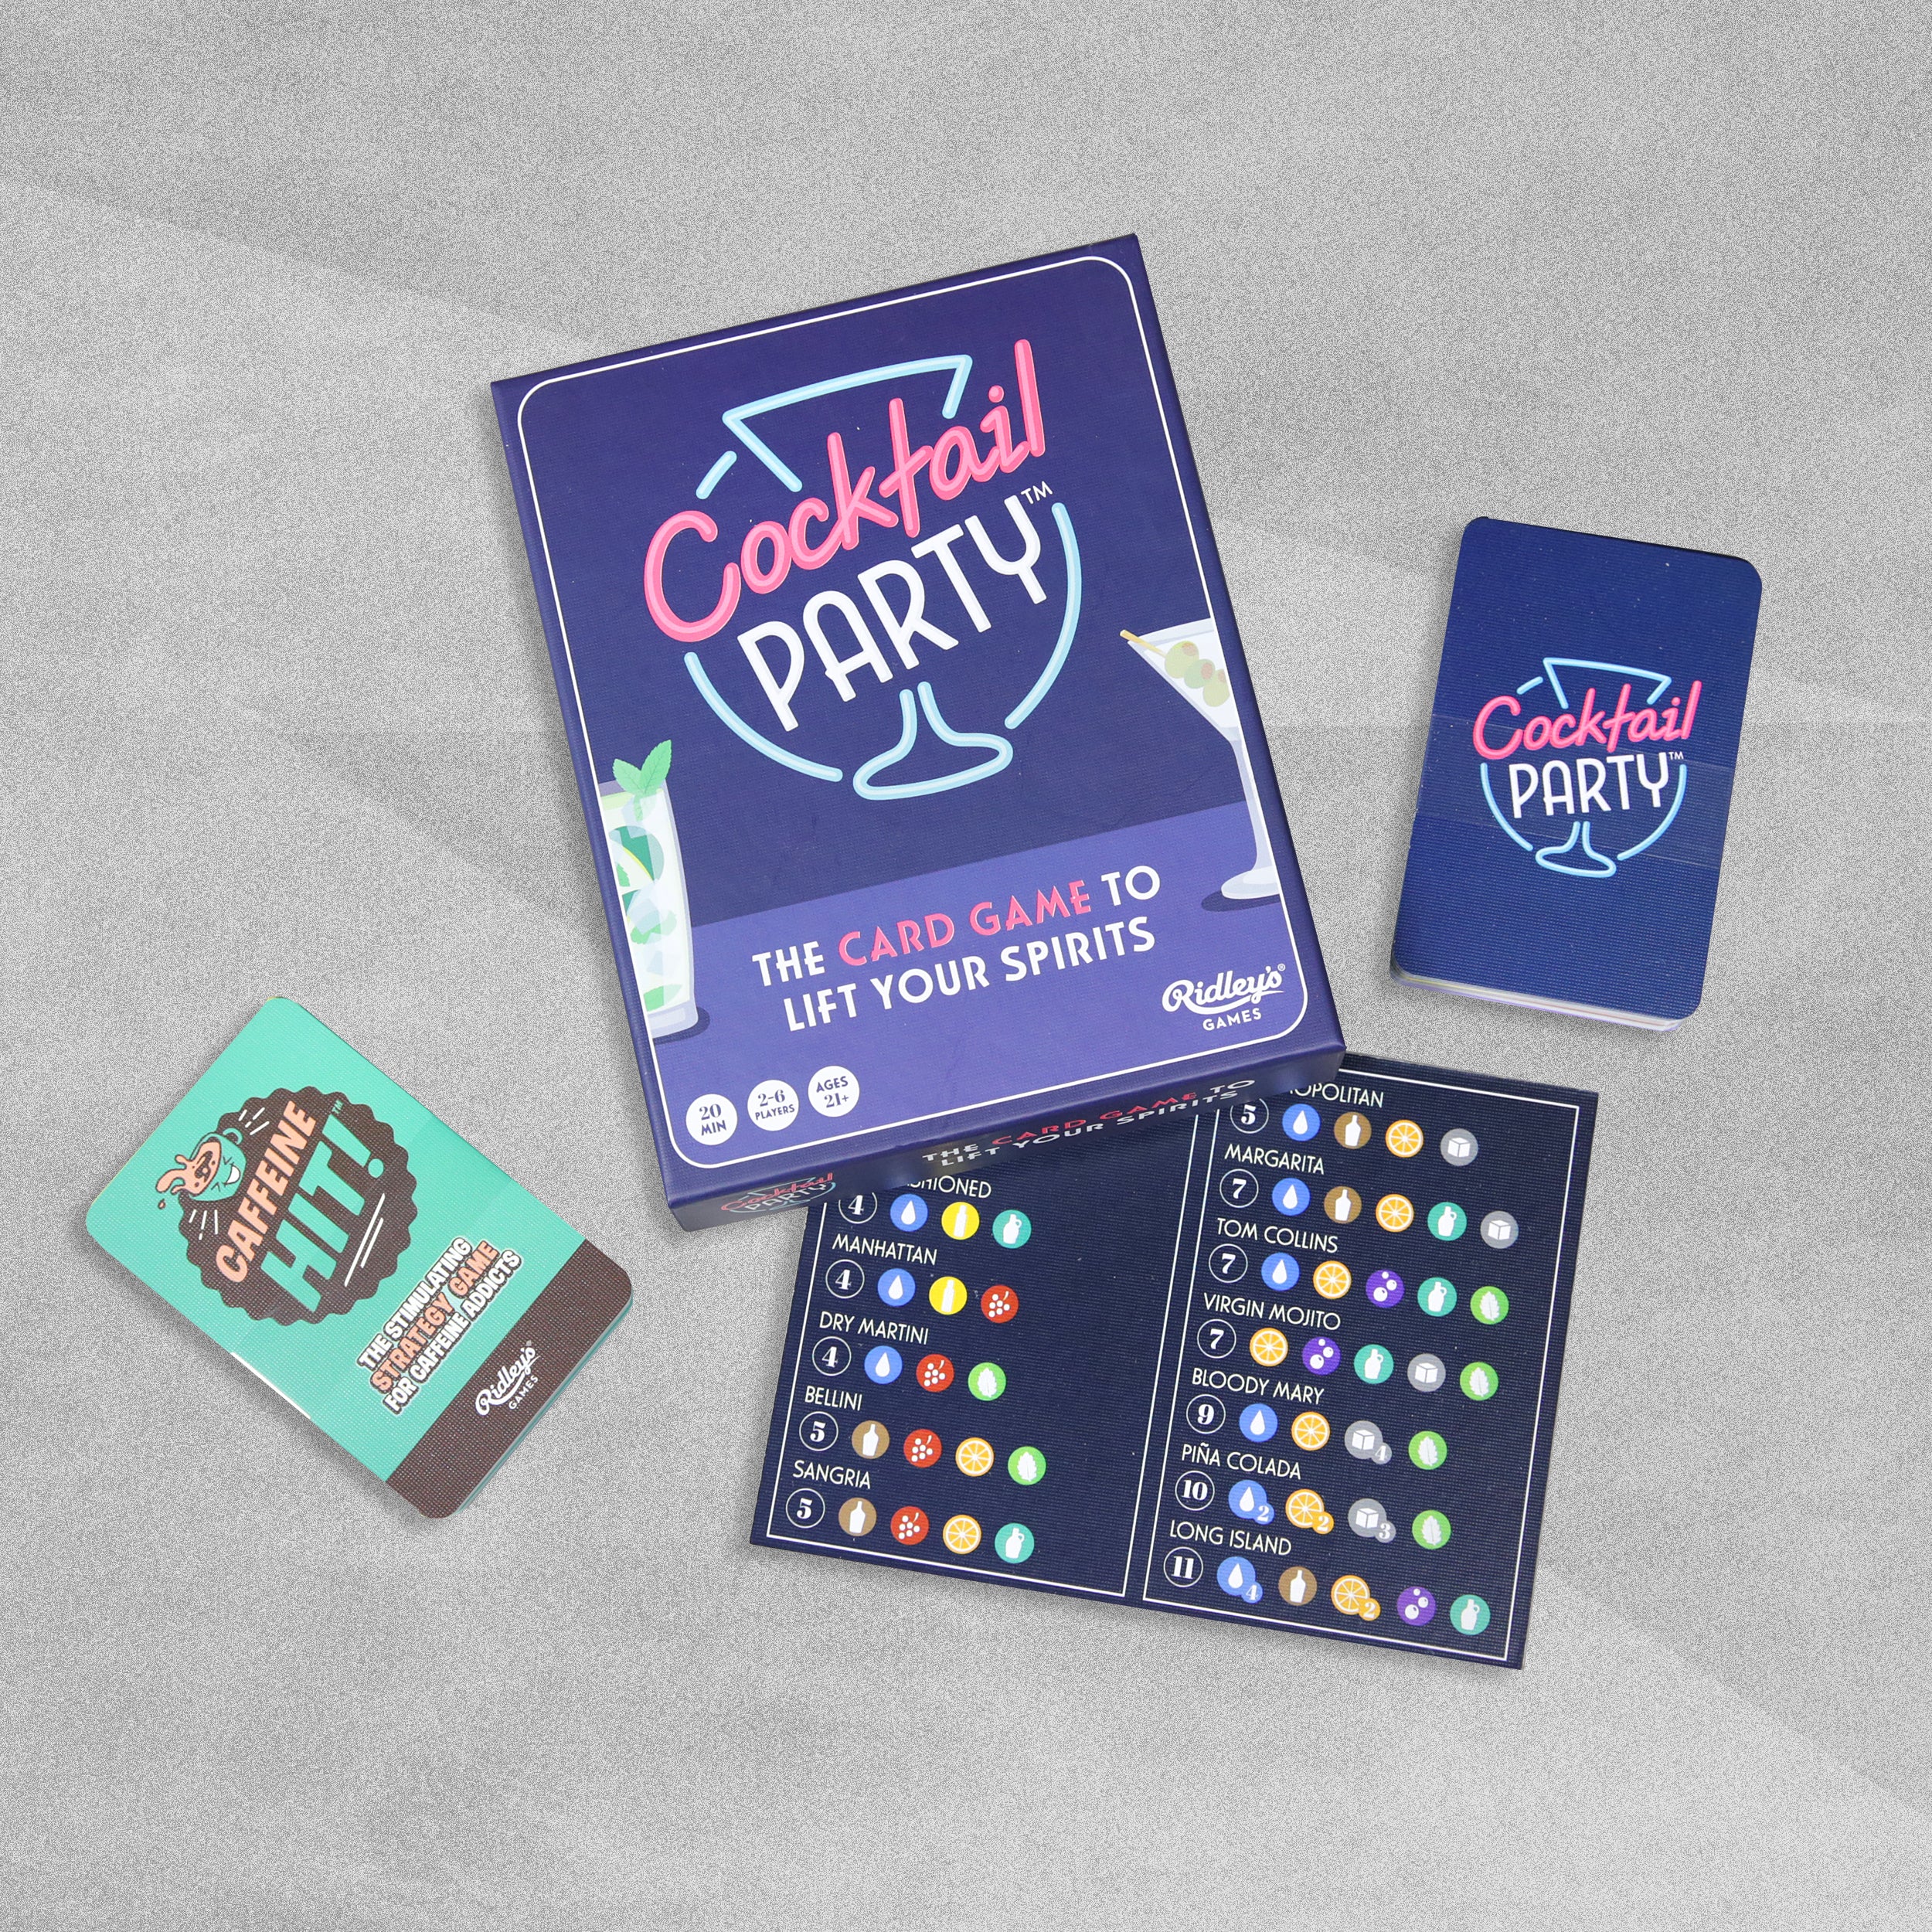 Cocktail Party - The Card Game to Lift Your Spirits (Adult Card Game)